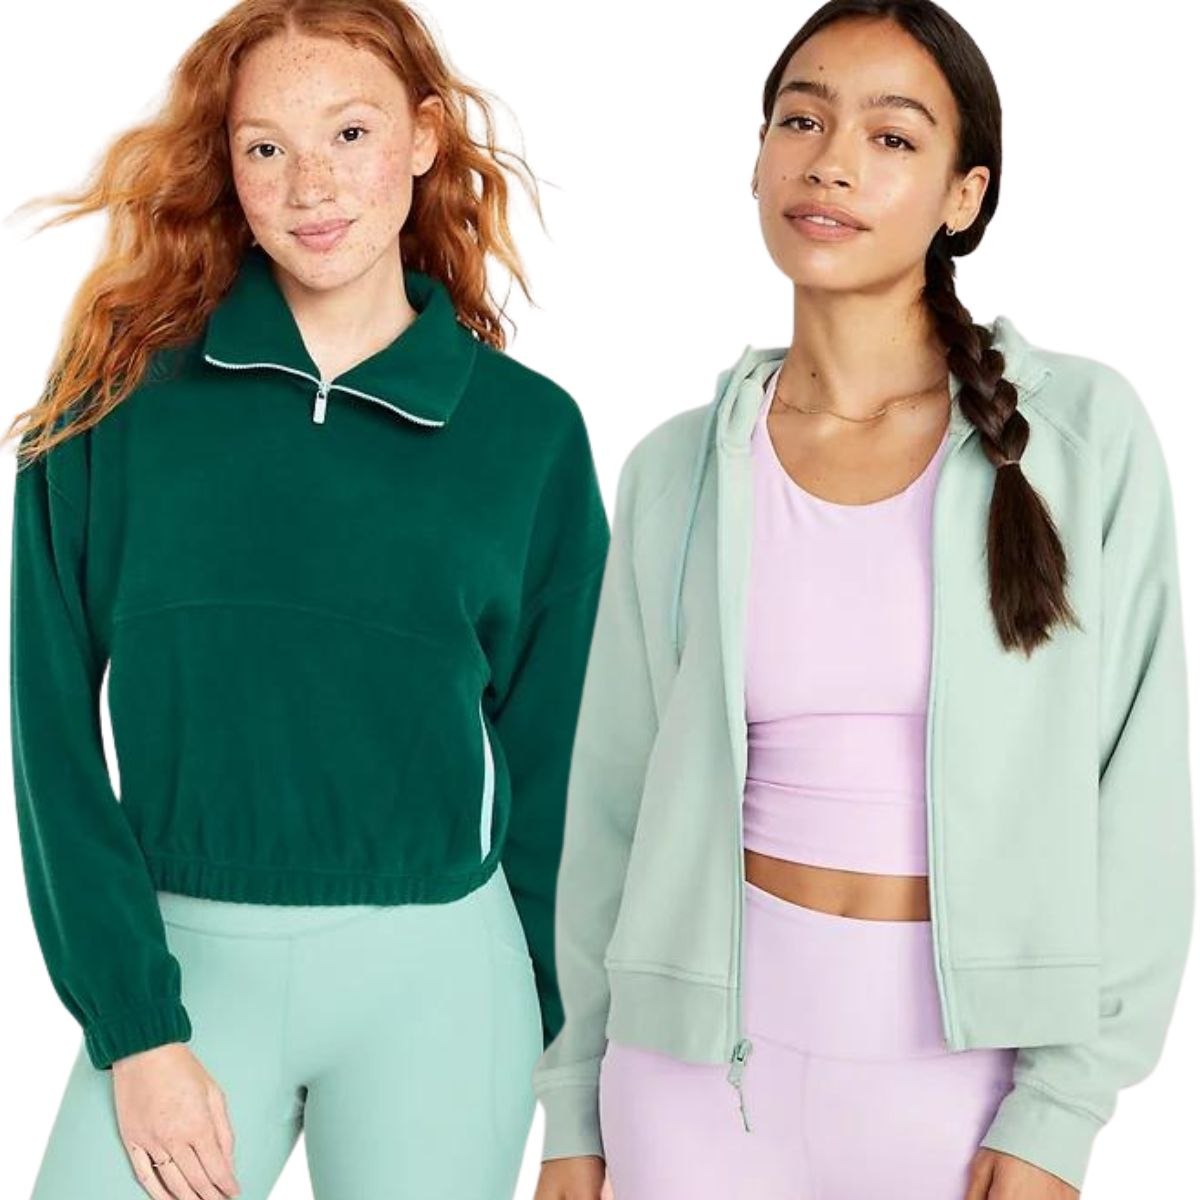 Did Old Navy Weave Its Activewear With Magic? Because These